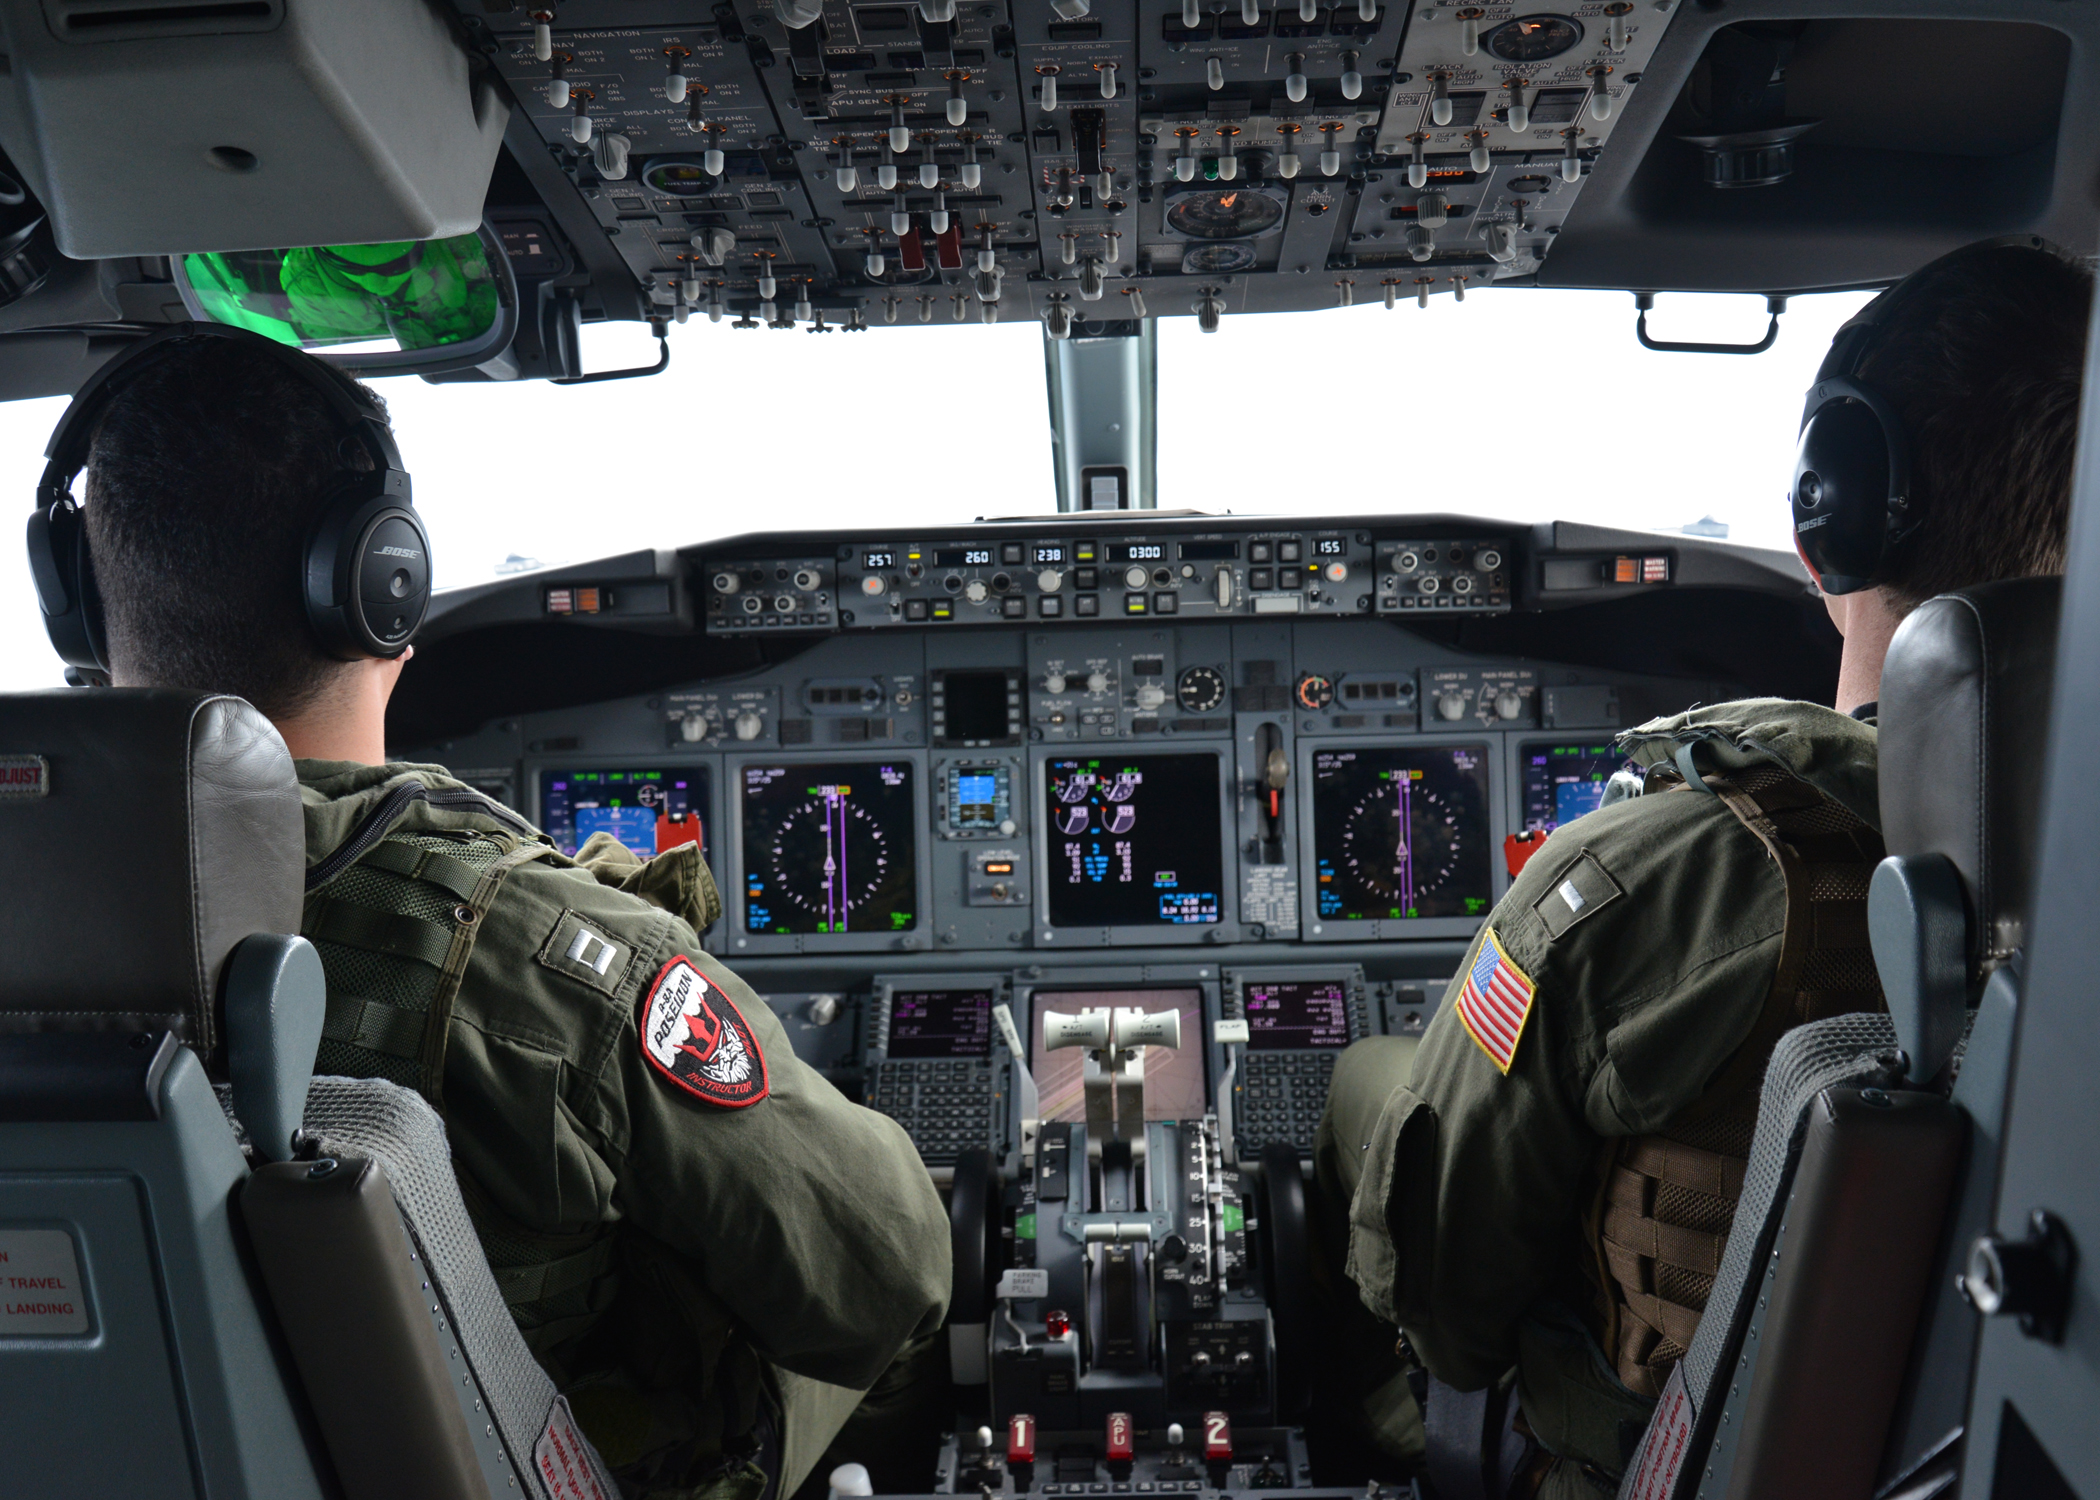 Naval aviators pilot a P-8A Poseidon, an aircraft based on a commercial airliner design, on March 24, 2014. US Navy Photo 